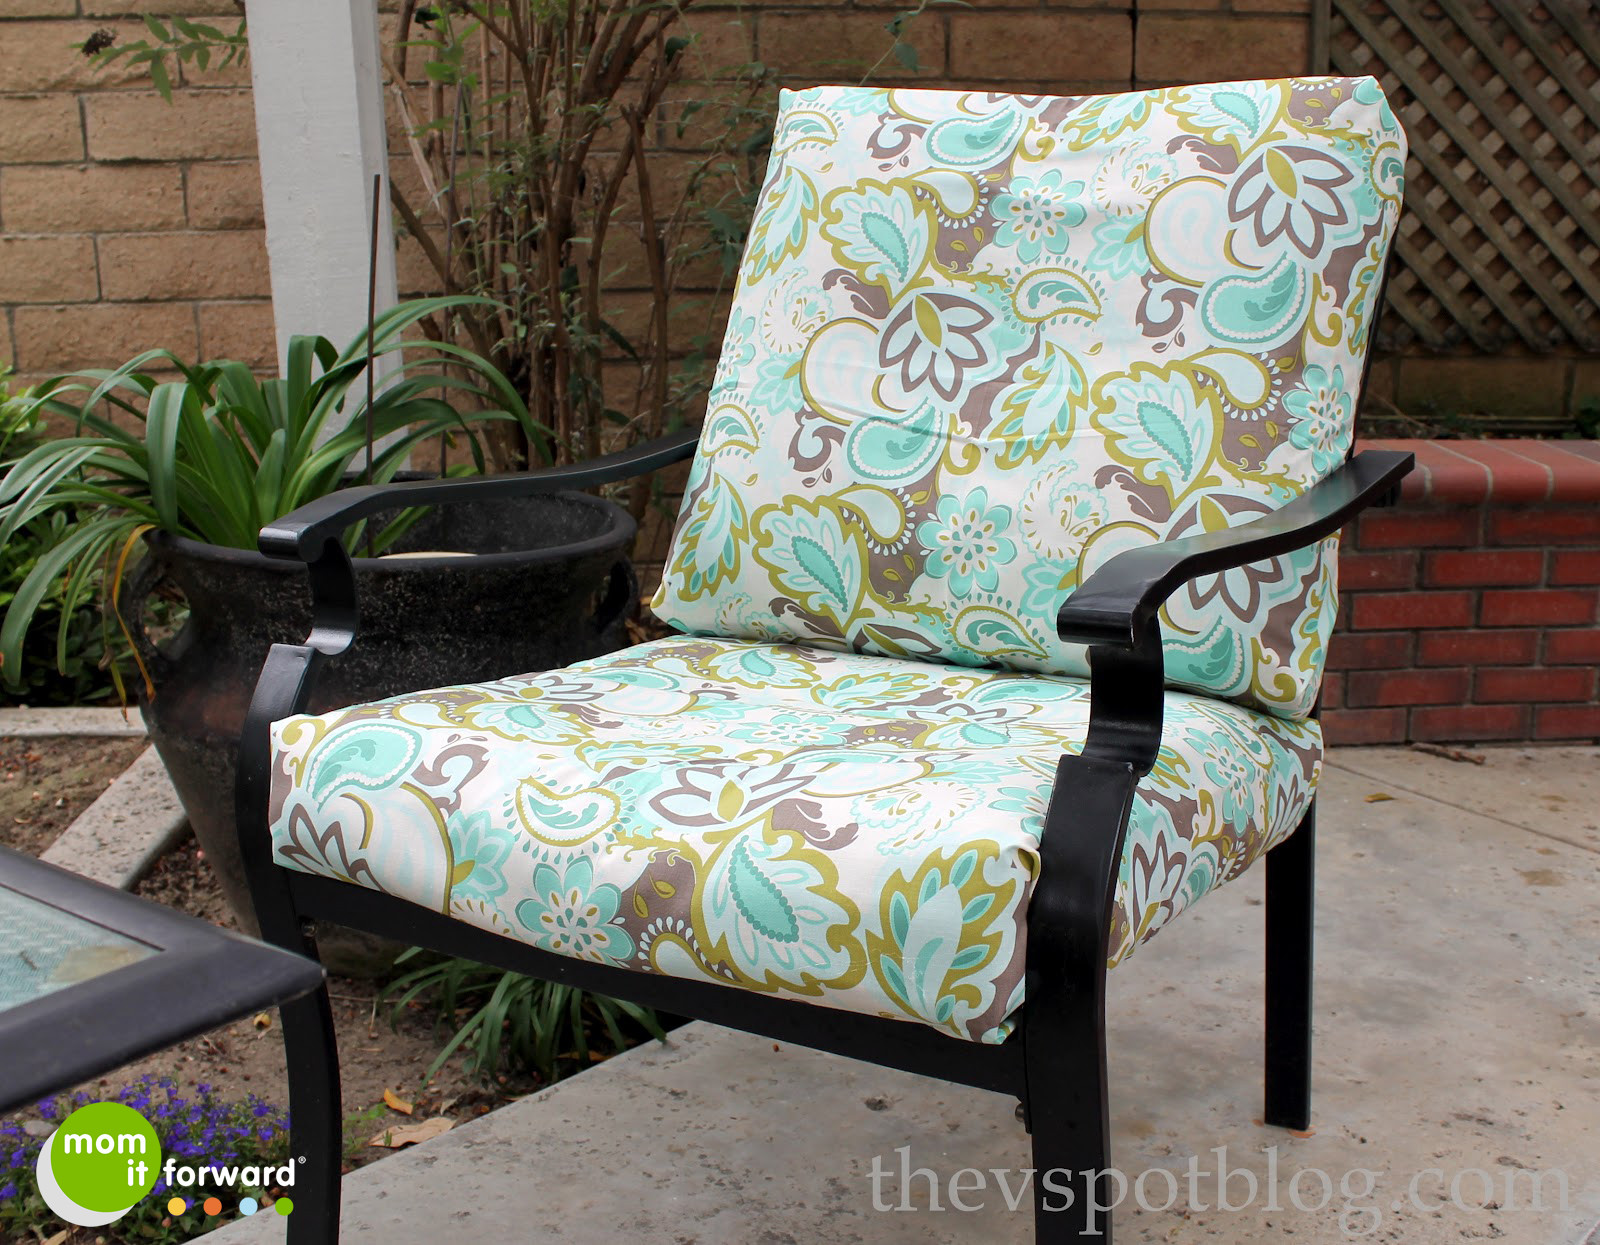 DIY Outdoor Couch Cushions
 DIY How to Recover Outdoor Furniture With a Glue Gun